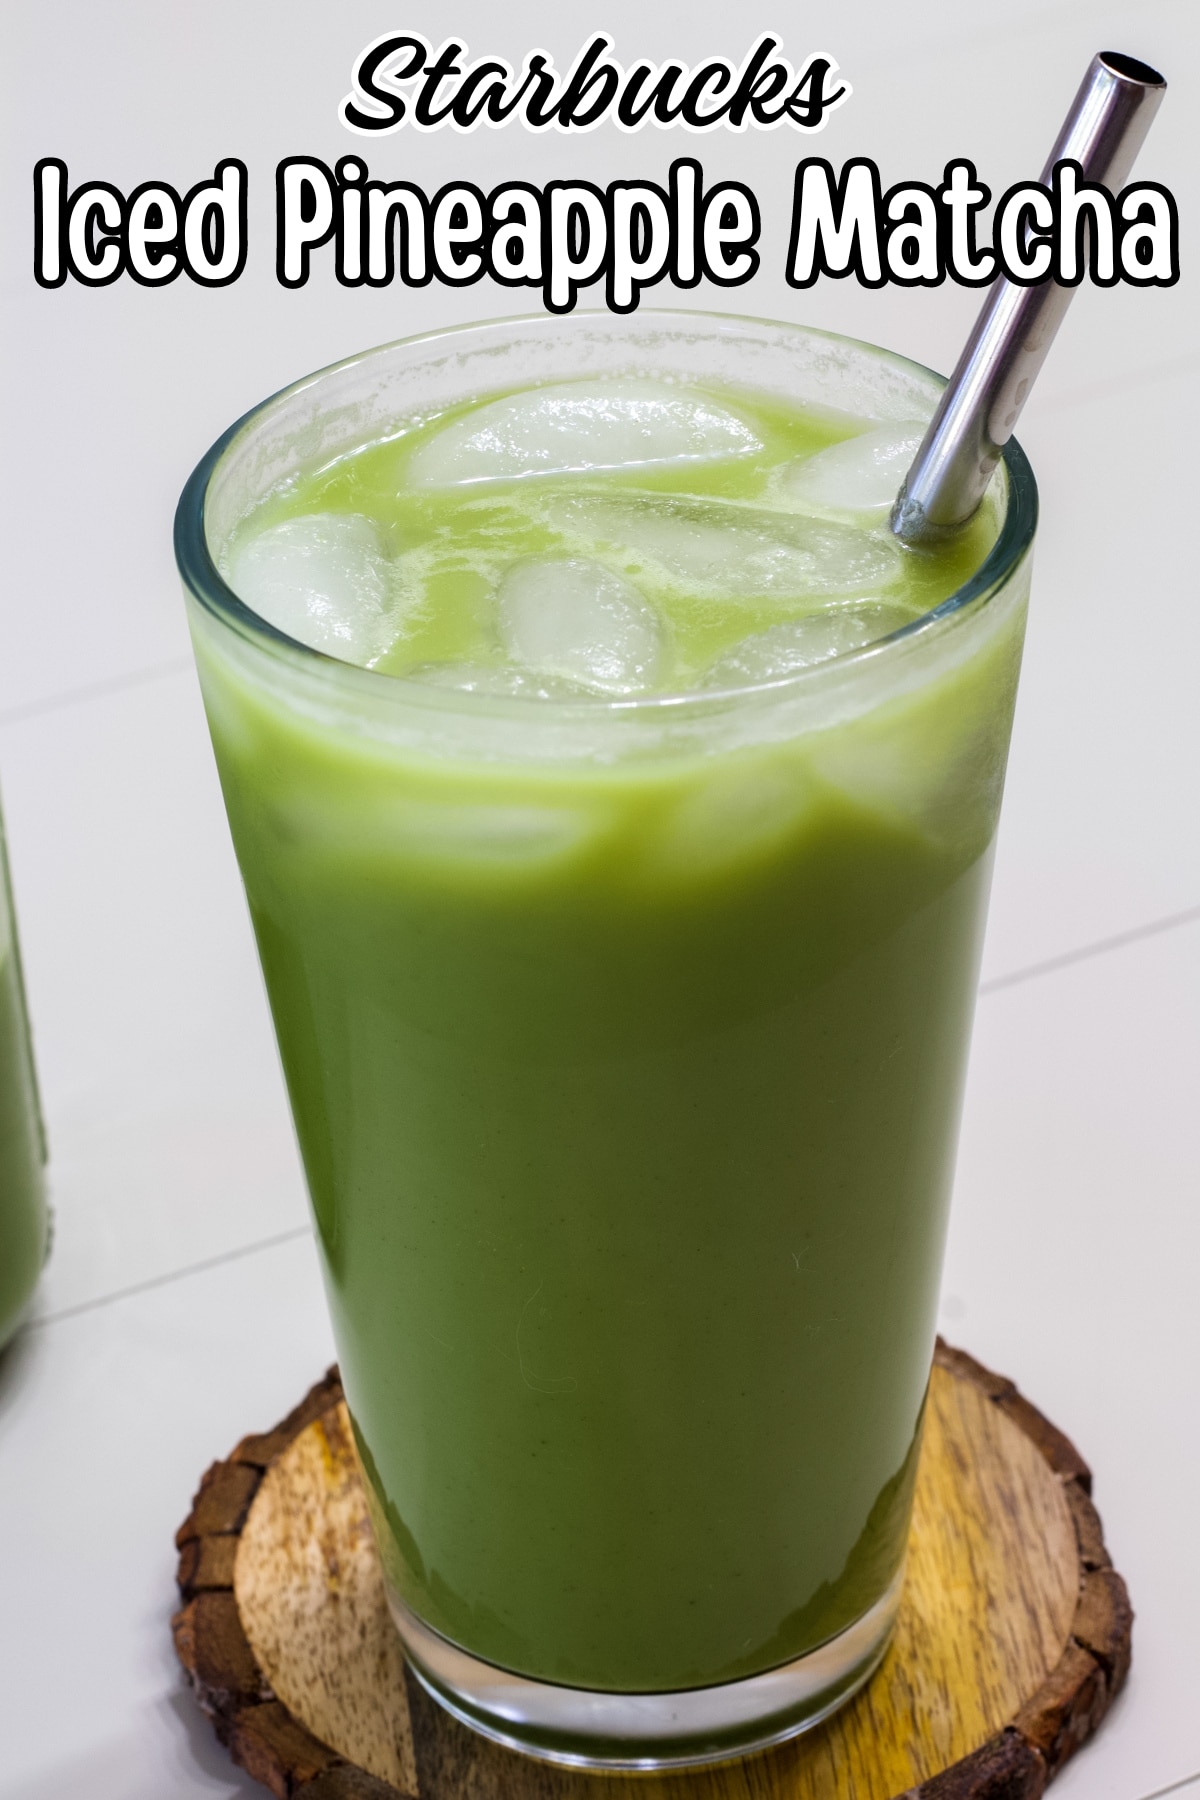 Enjoy a delicious Copycat Starbucks Iced Pineapple Matcha Drink at home. Follow our recipe for a refreshing matcha-based drink with pineapple juice, coconut milk, ginger and just a bit of sugar. via @mindyscookingobsession